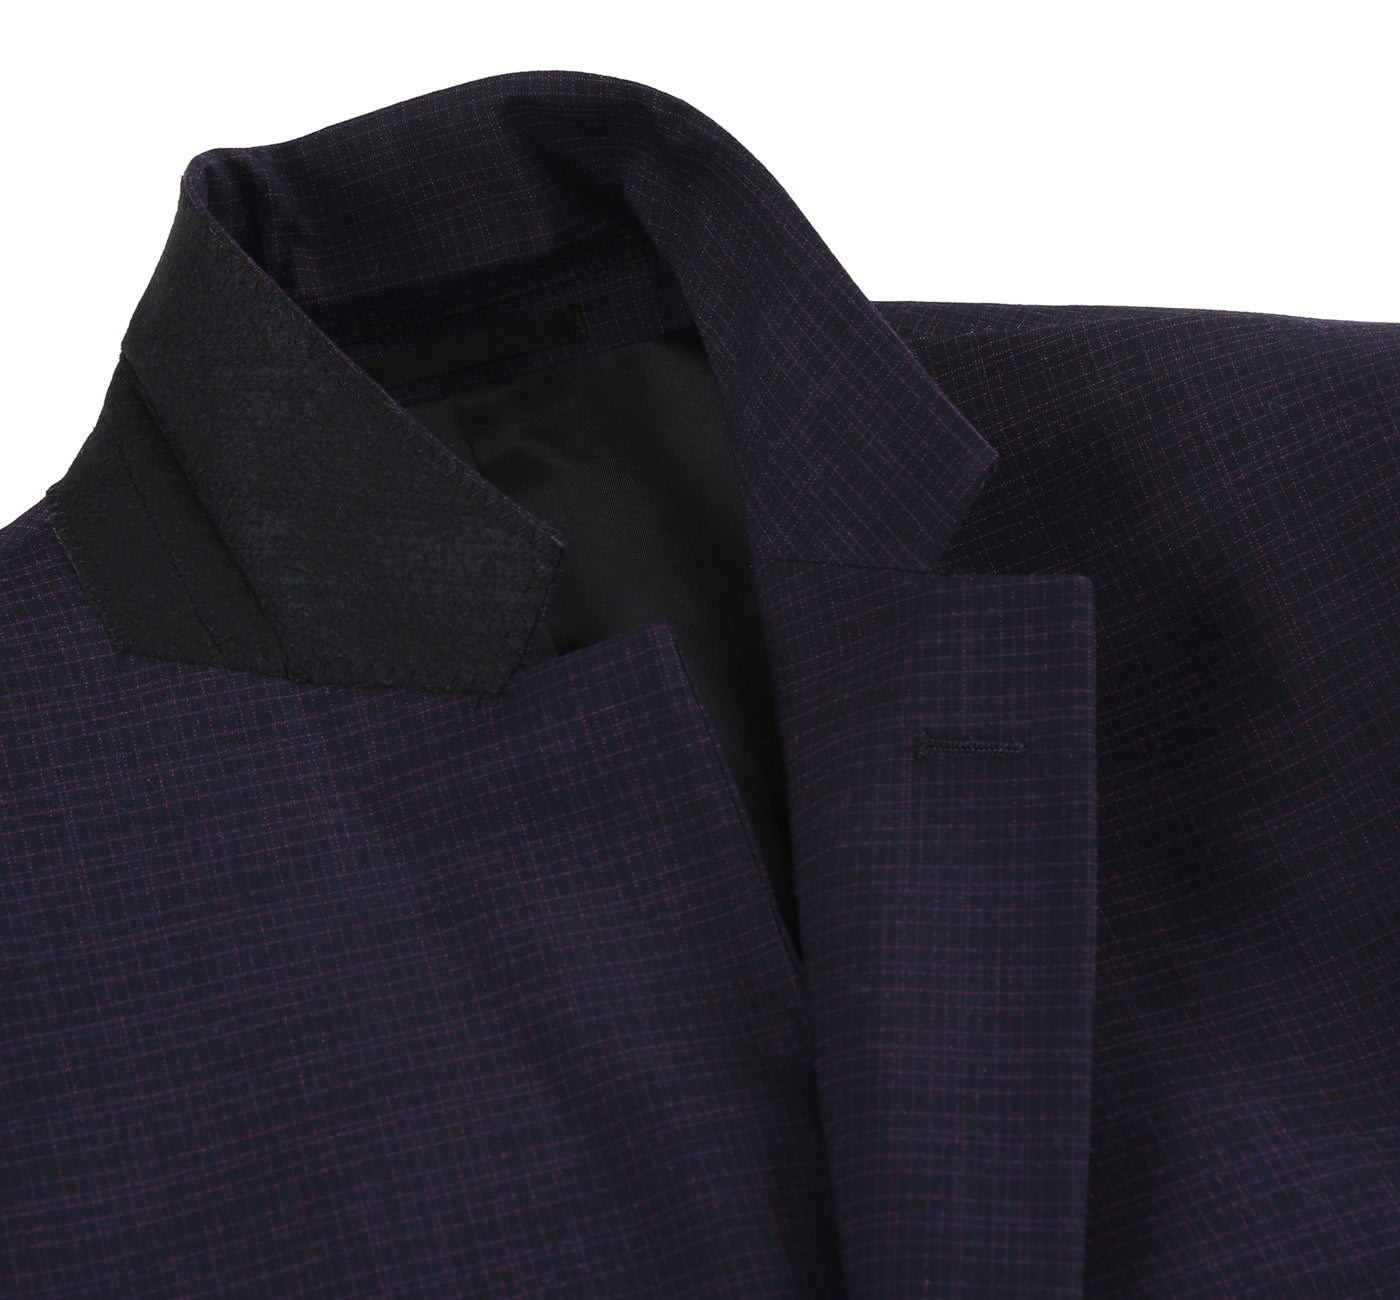 293-13 Men's Classic Fit Single-Breasted Black and Purple Micro Check Notch Lapel Suit